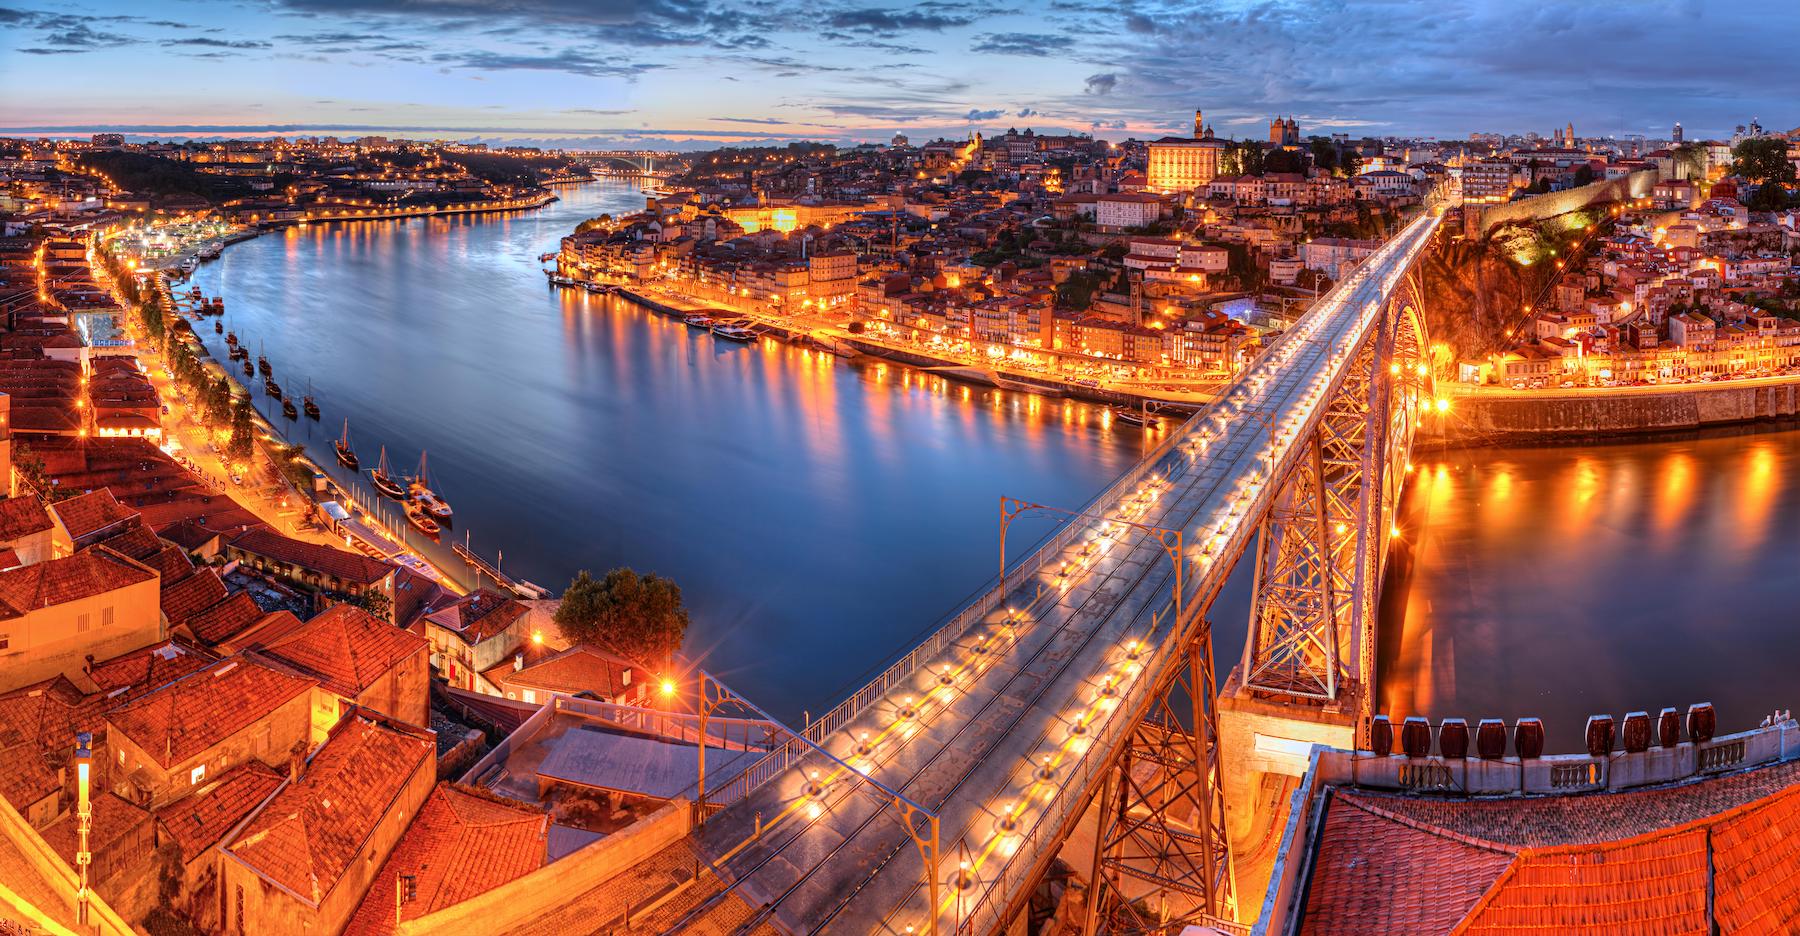 Ribeira District in Portugal on partly cloudy evening as the streetlights from the city light up the river under the bridge